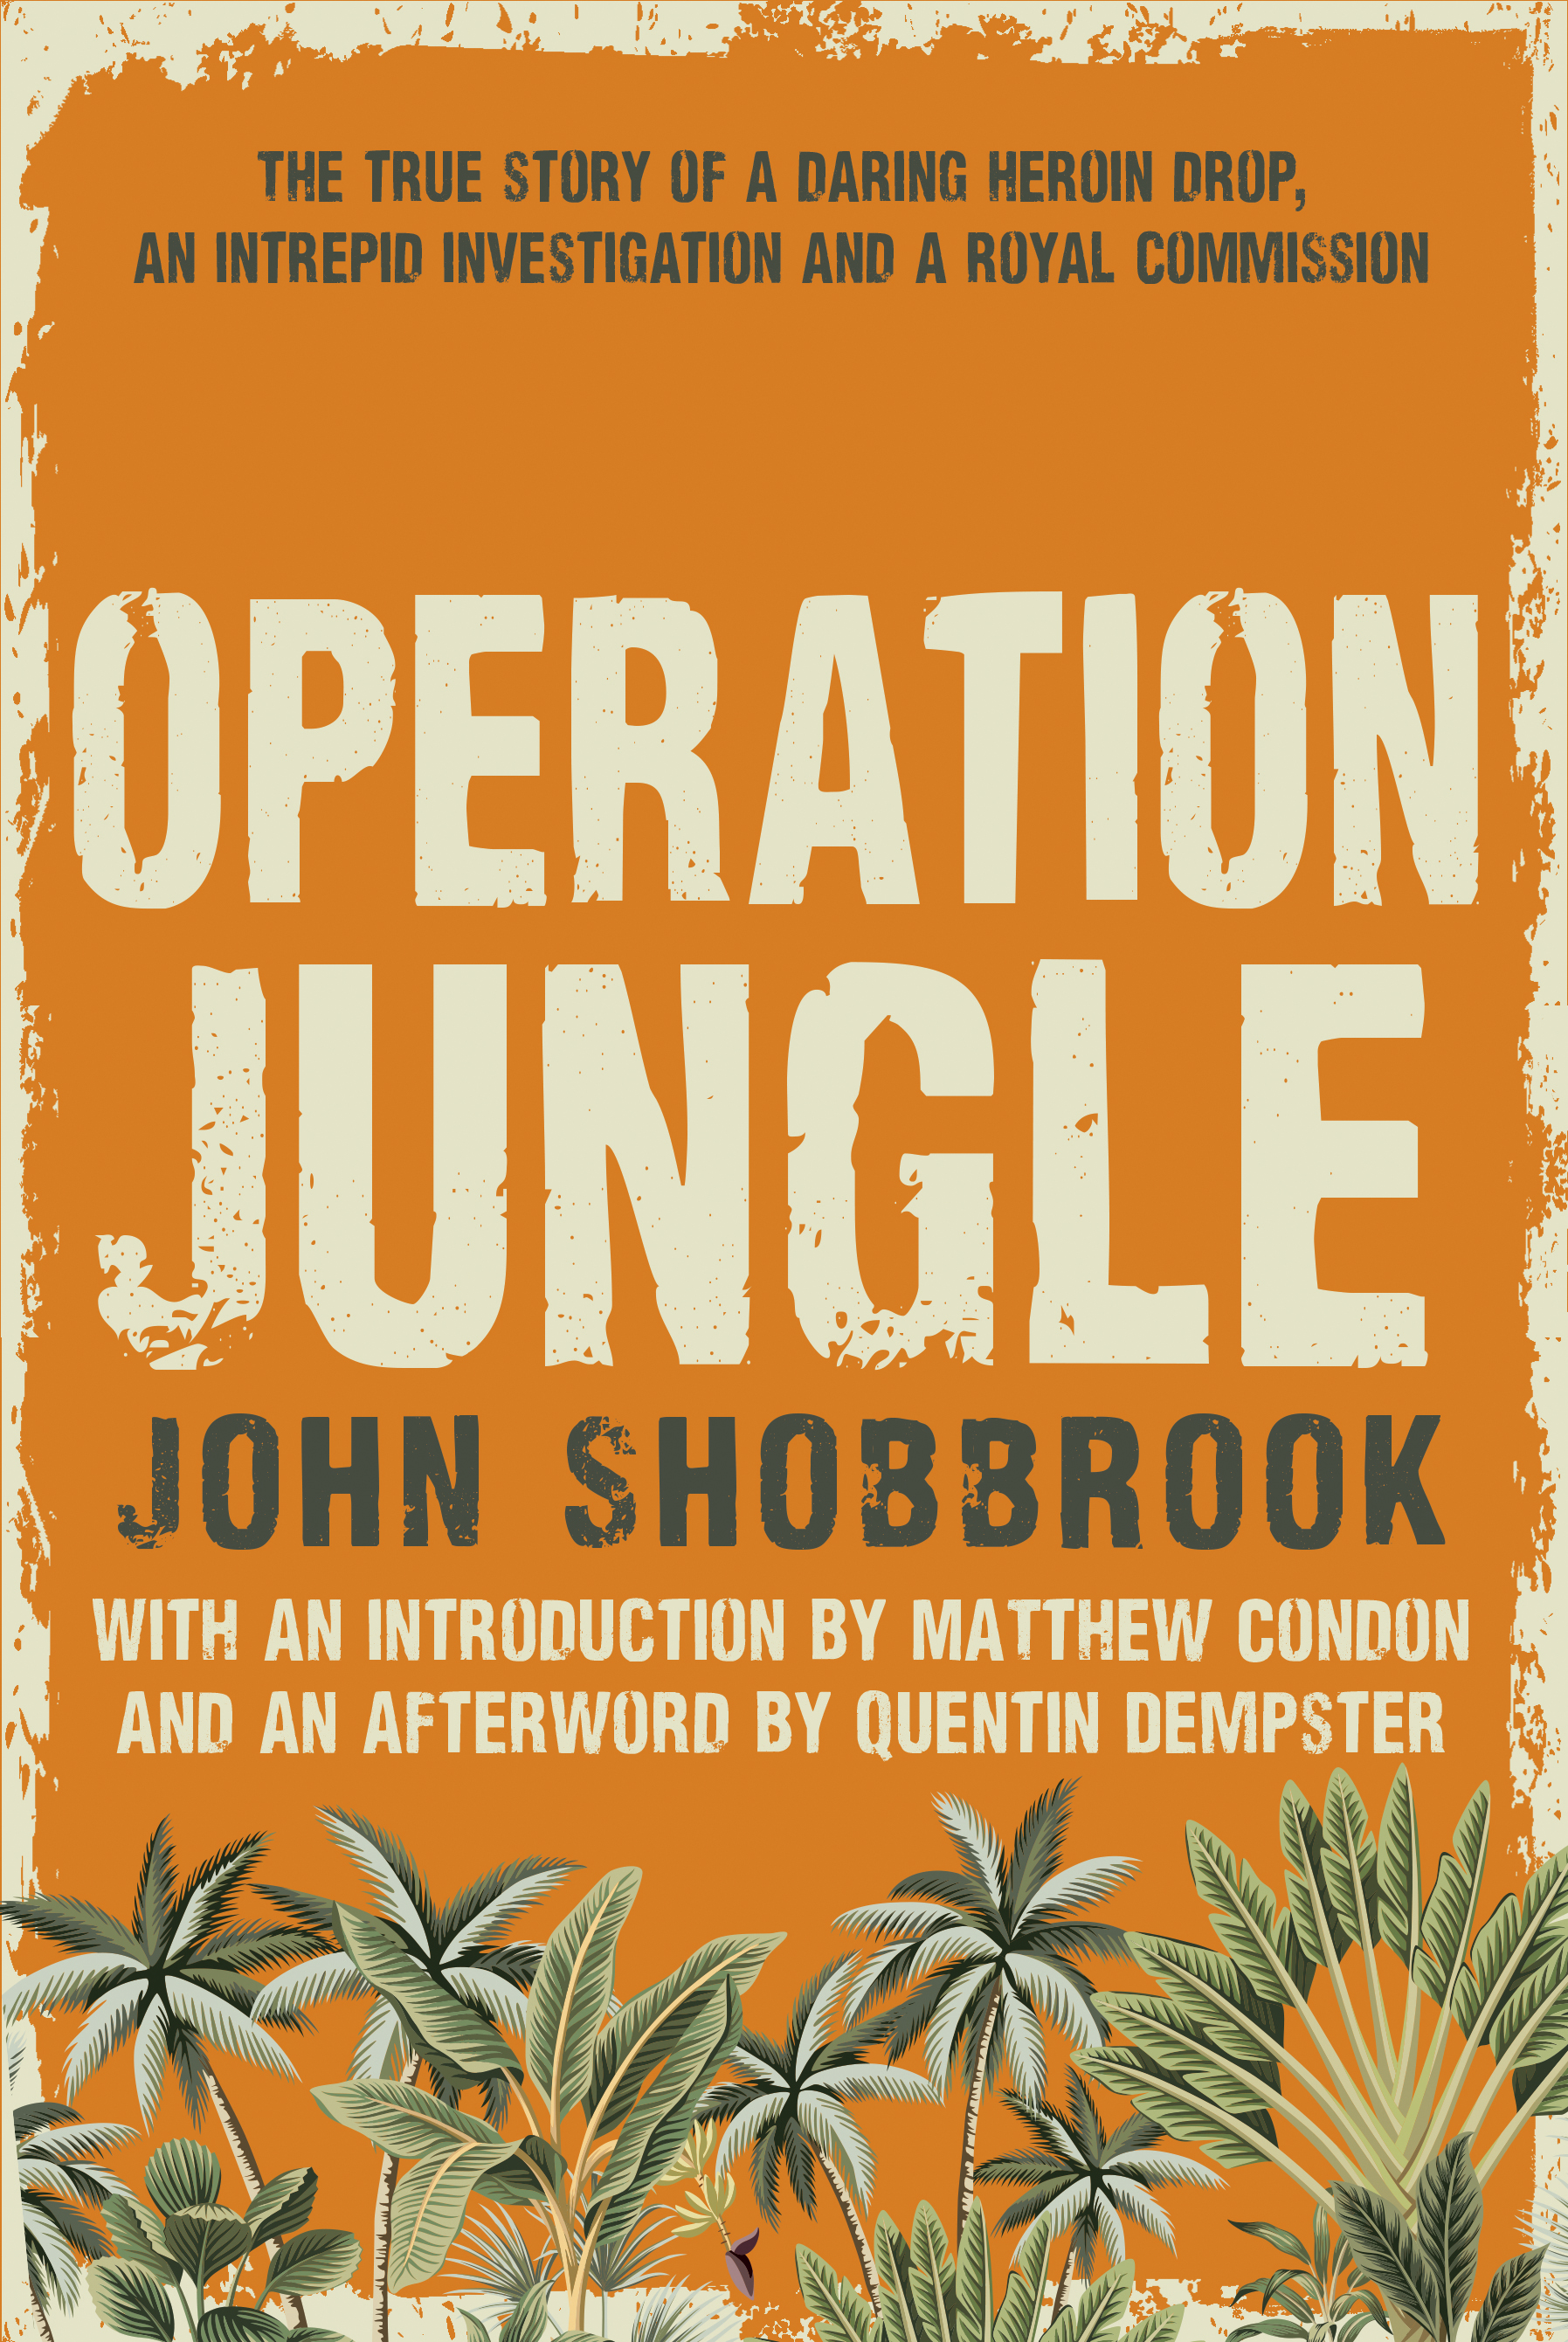 Cover of Operation Jungle by John Shobbrook. The book is orange with palm trees along the bottom and a 'frayed' look to the lettering